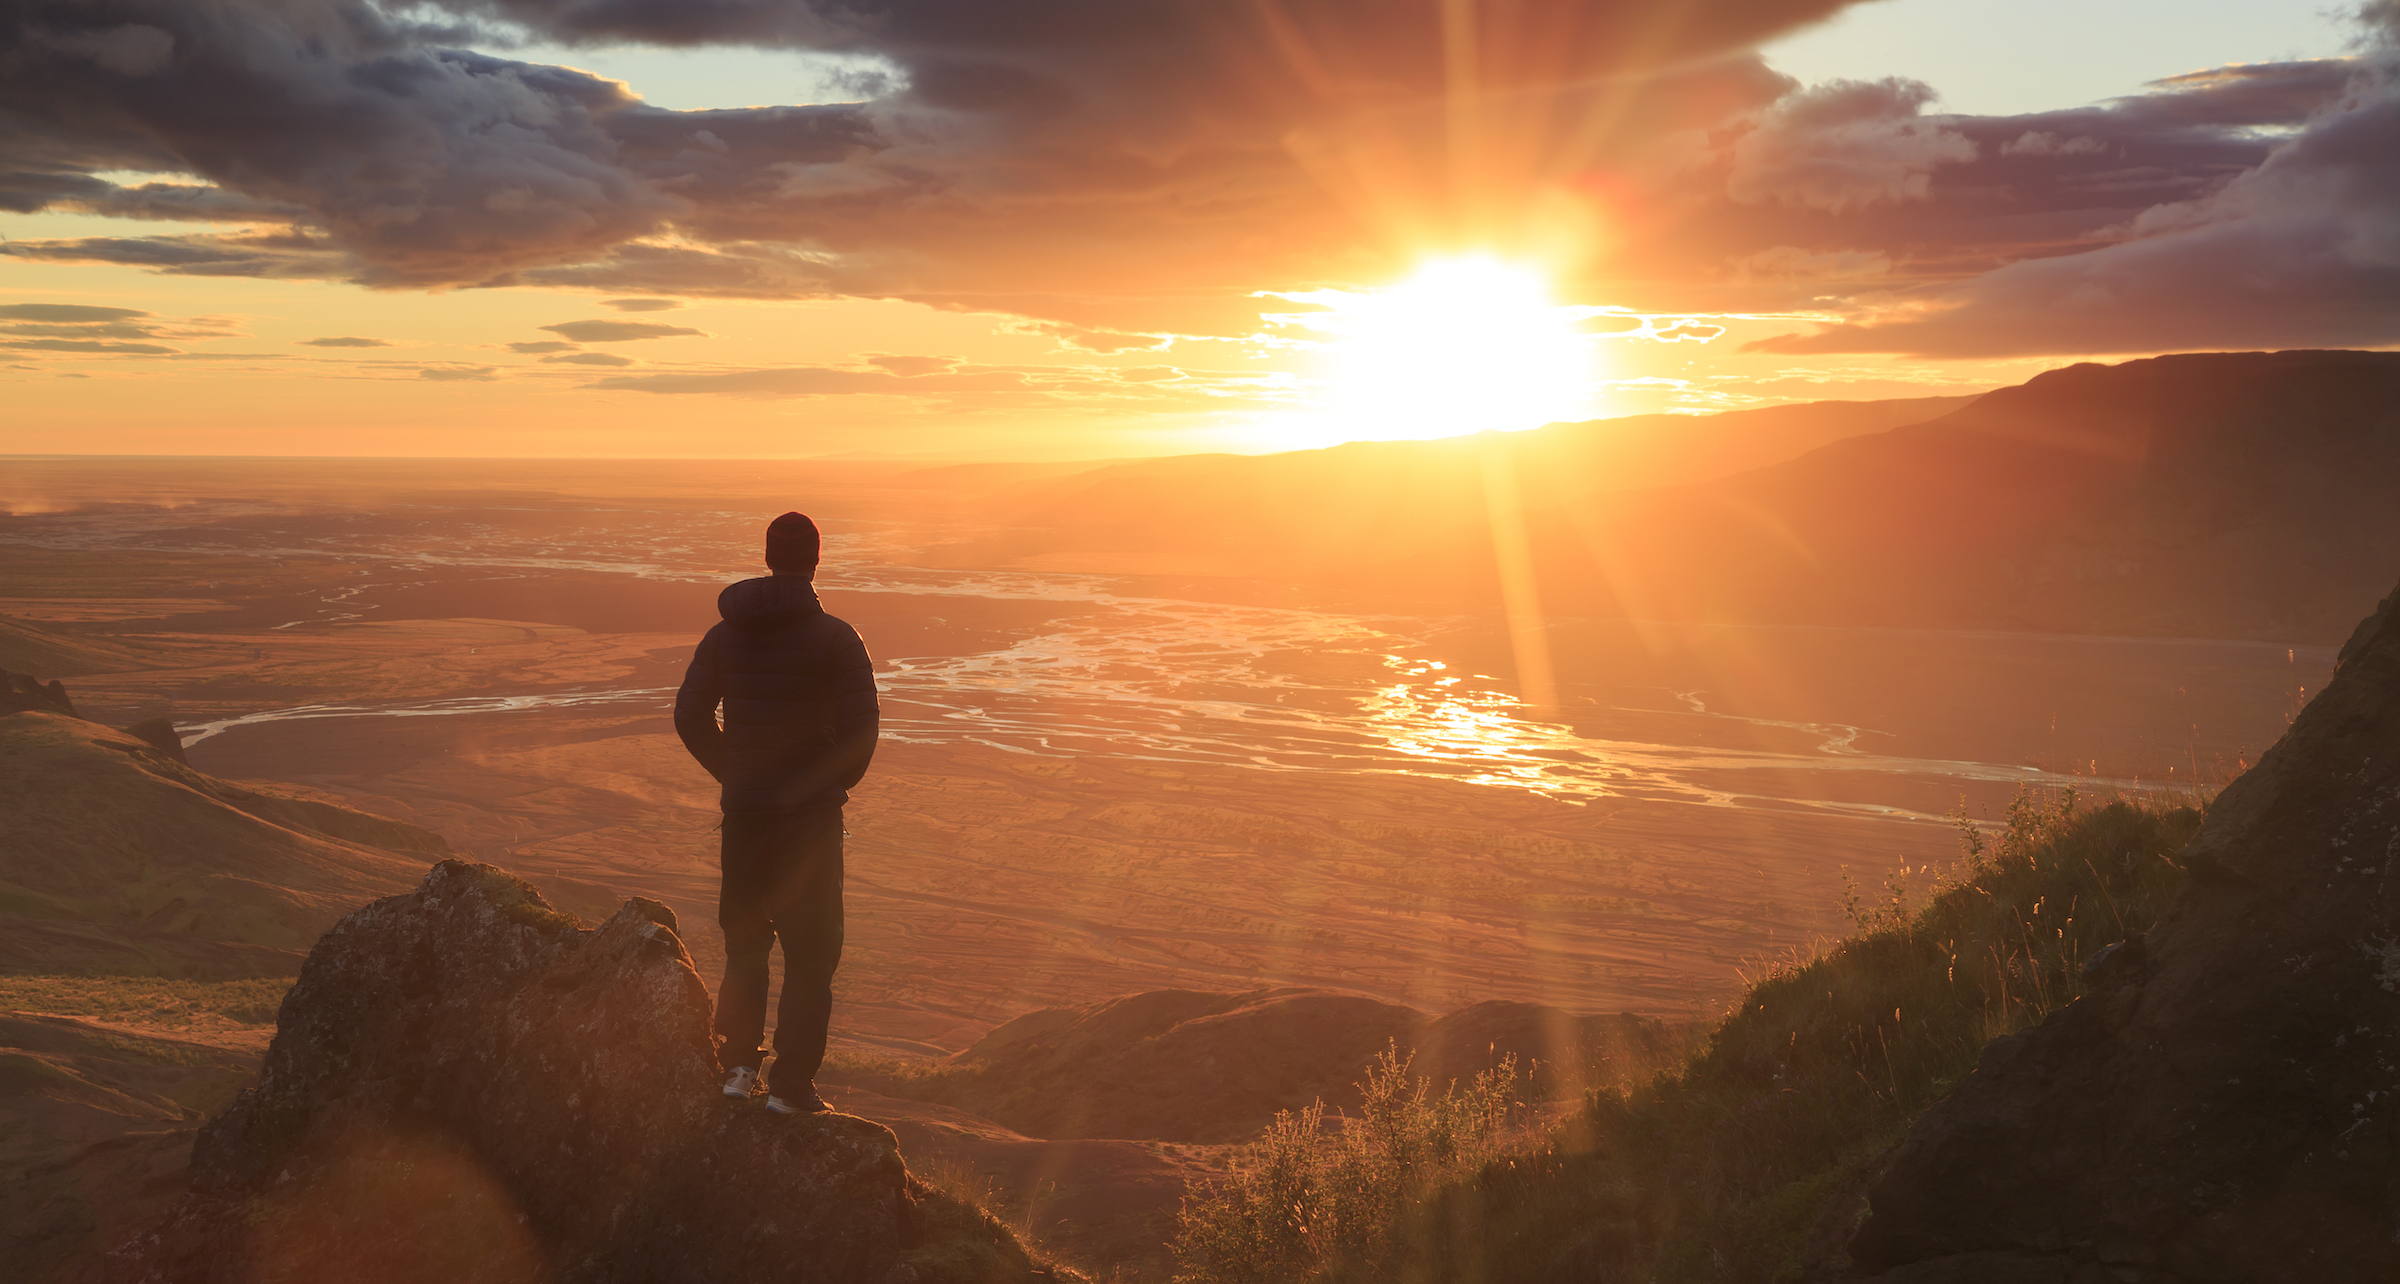 Man standing on a ledge of a mountain, enjoying the sunset over a river valley in Thorsmork, Iceland. With lens flare.